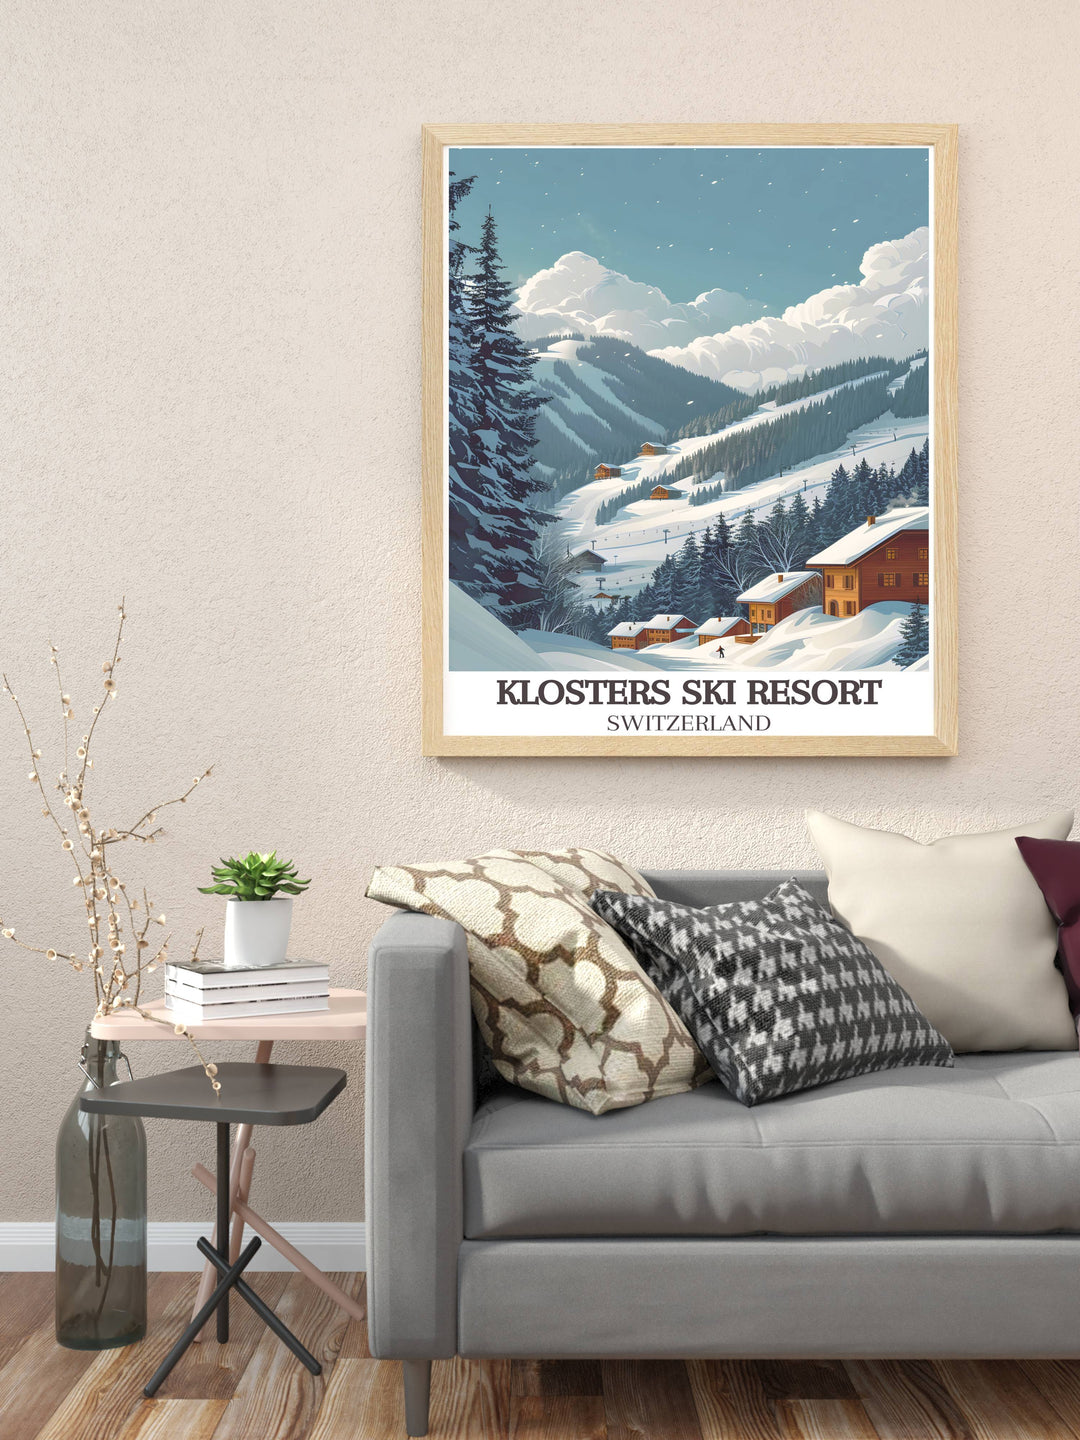 Add a touch of elegance to your home with our Klosters Ski Resort Artwork. This Framed Print features beautiful vintage designs that celebrate the spirit of skiing at Klosters. Perfect for winter sports enthusiasts and art lovers alike